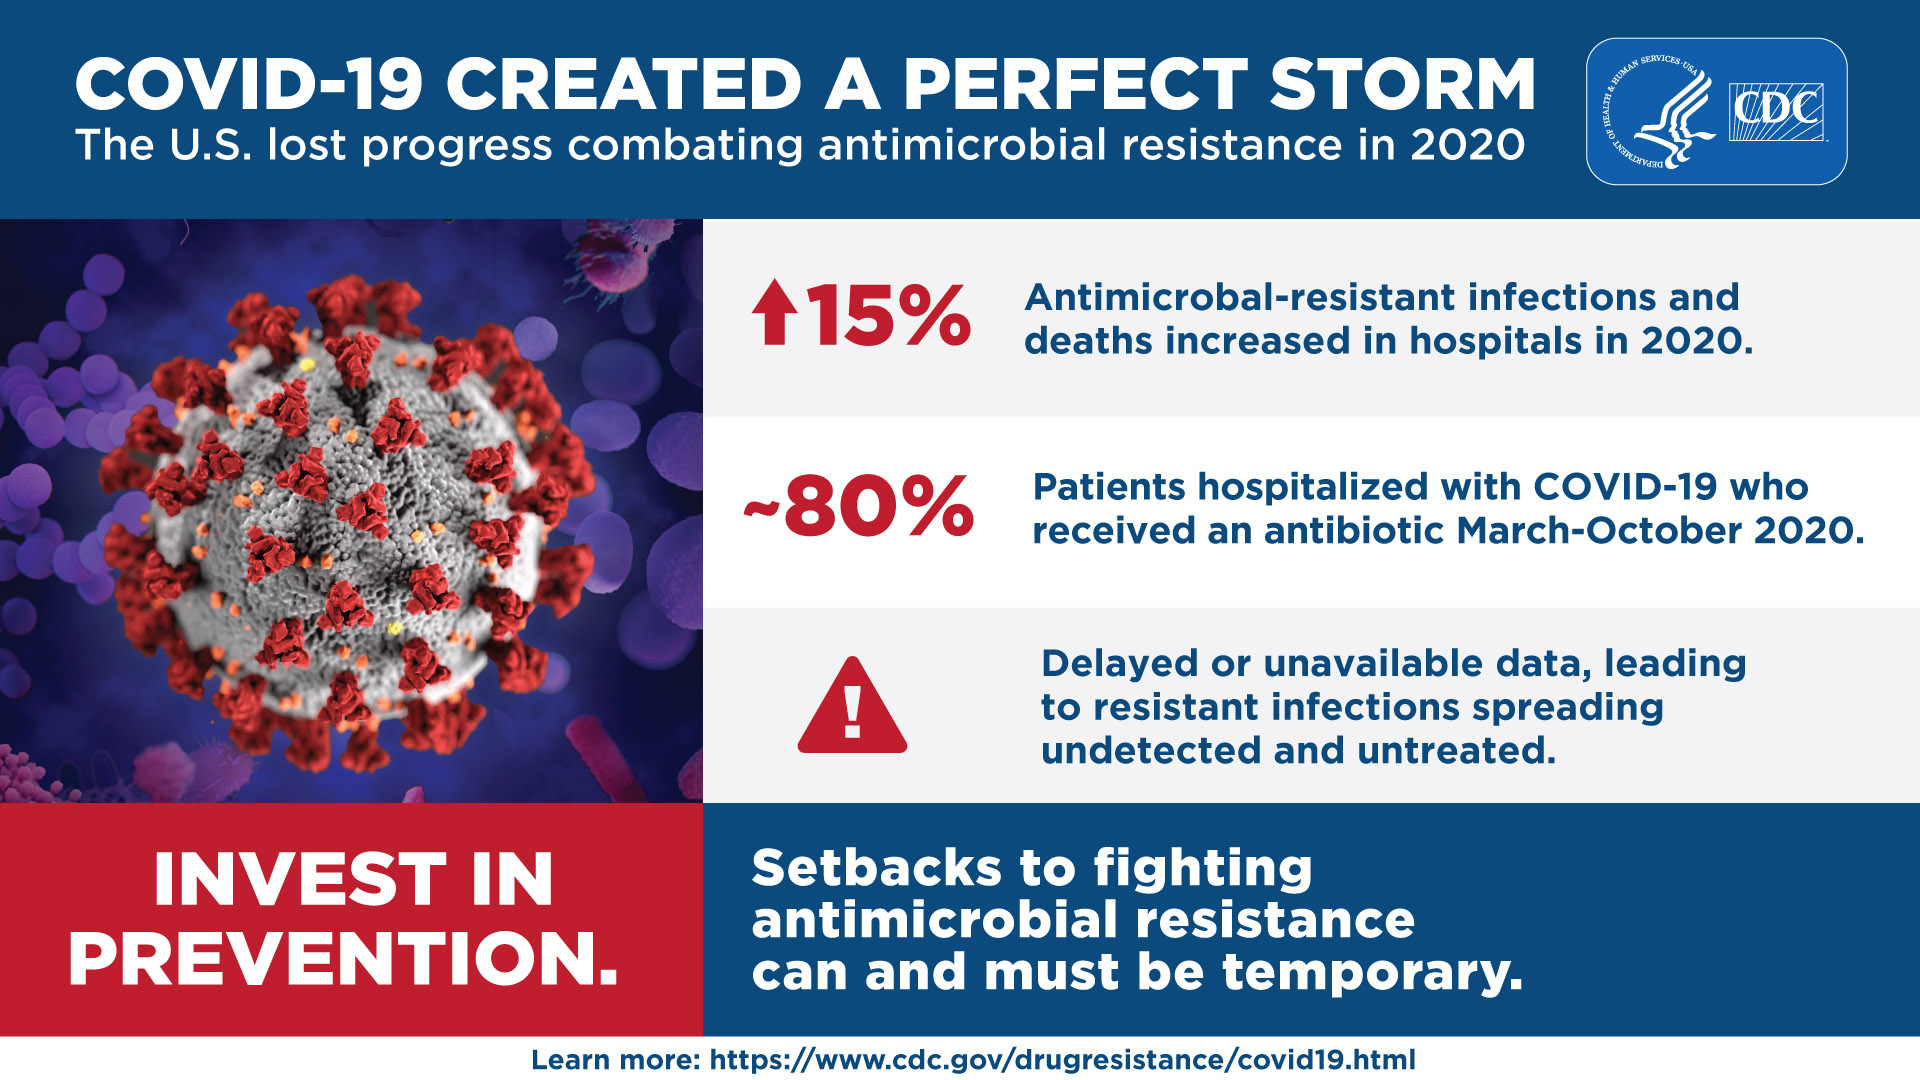 Covid-19 Created a Perfect Storm The U.S. lost progress combating antimicrobial resistance in 2020 Antimicrobial infections and deaths increased  15% in hospitals in 2020. 80% of patients hospitalized with Covid-19 received an antibiotic March-October 2020. Delayed or unavailable data, leading to resistant infections spreading undetected and untreated. Invest in prevention. Setbacks to fighting antimicrobial resistance can and must be temporary. Learn more: https://www.cdc.gov/drugresistance/covid19.html